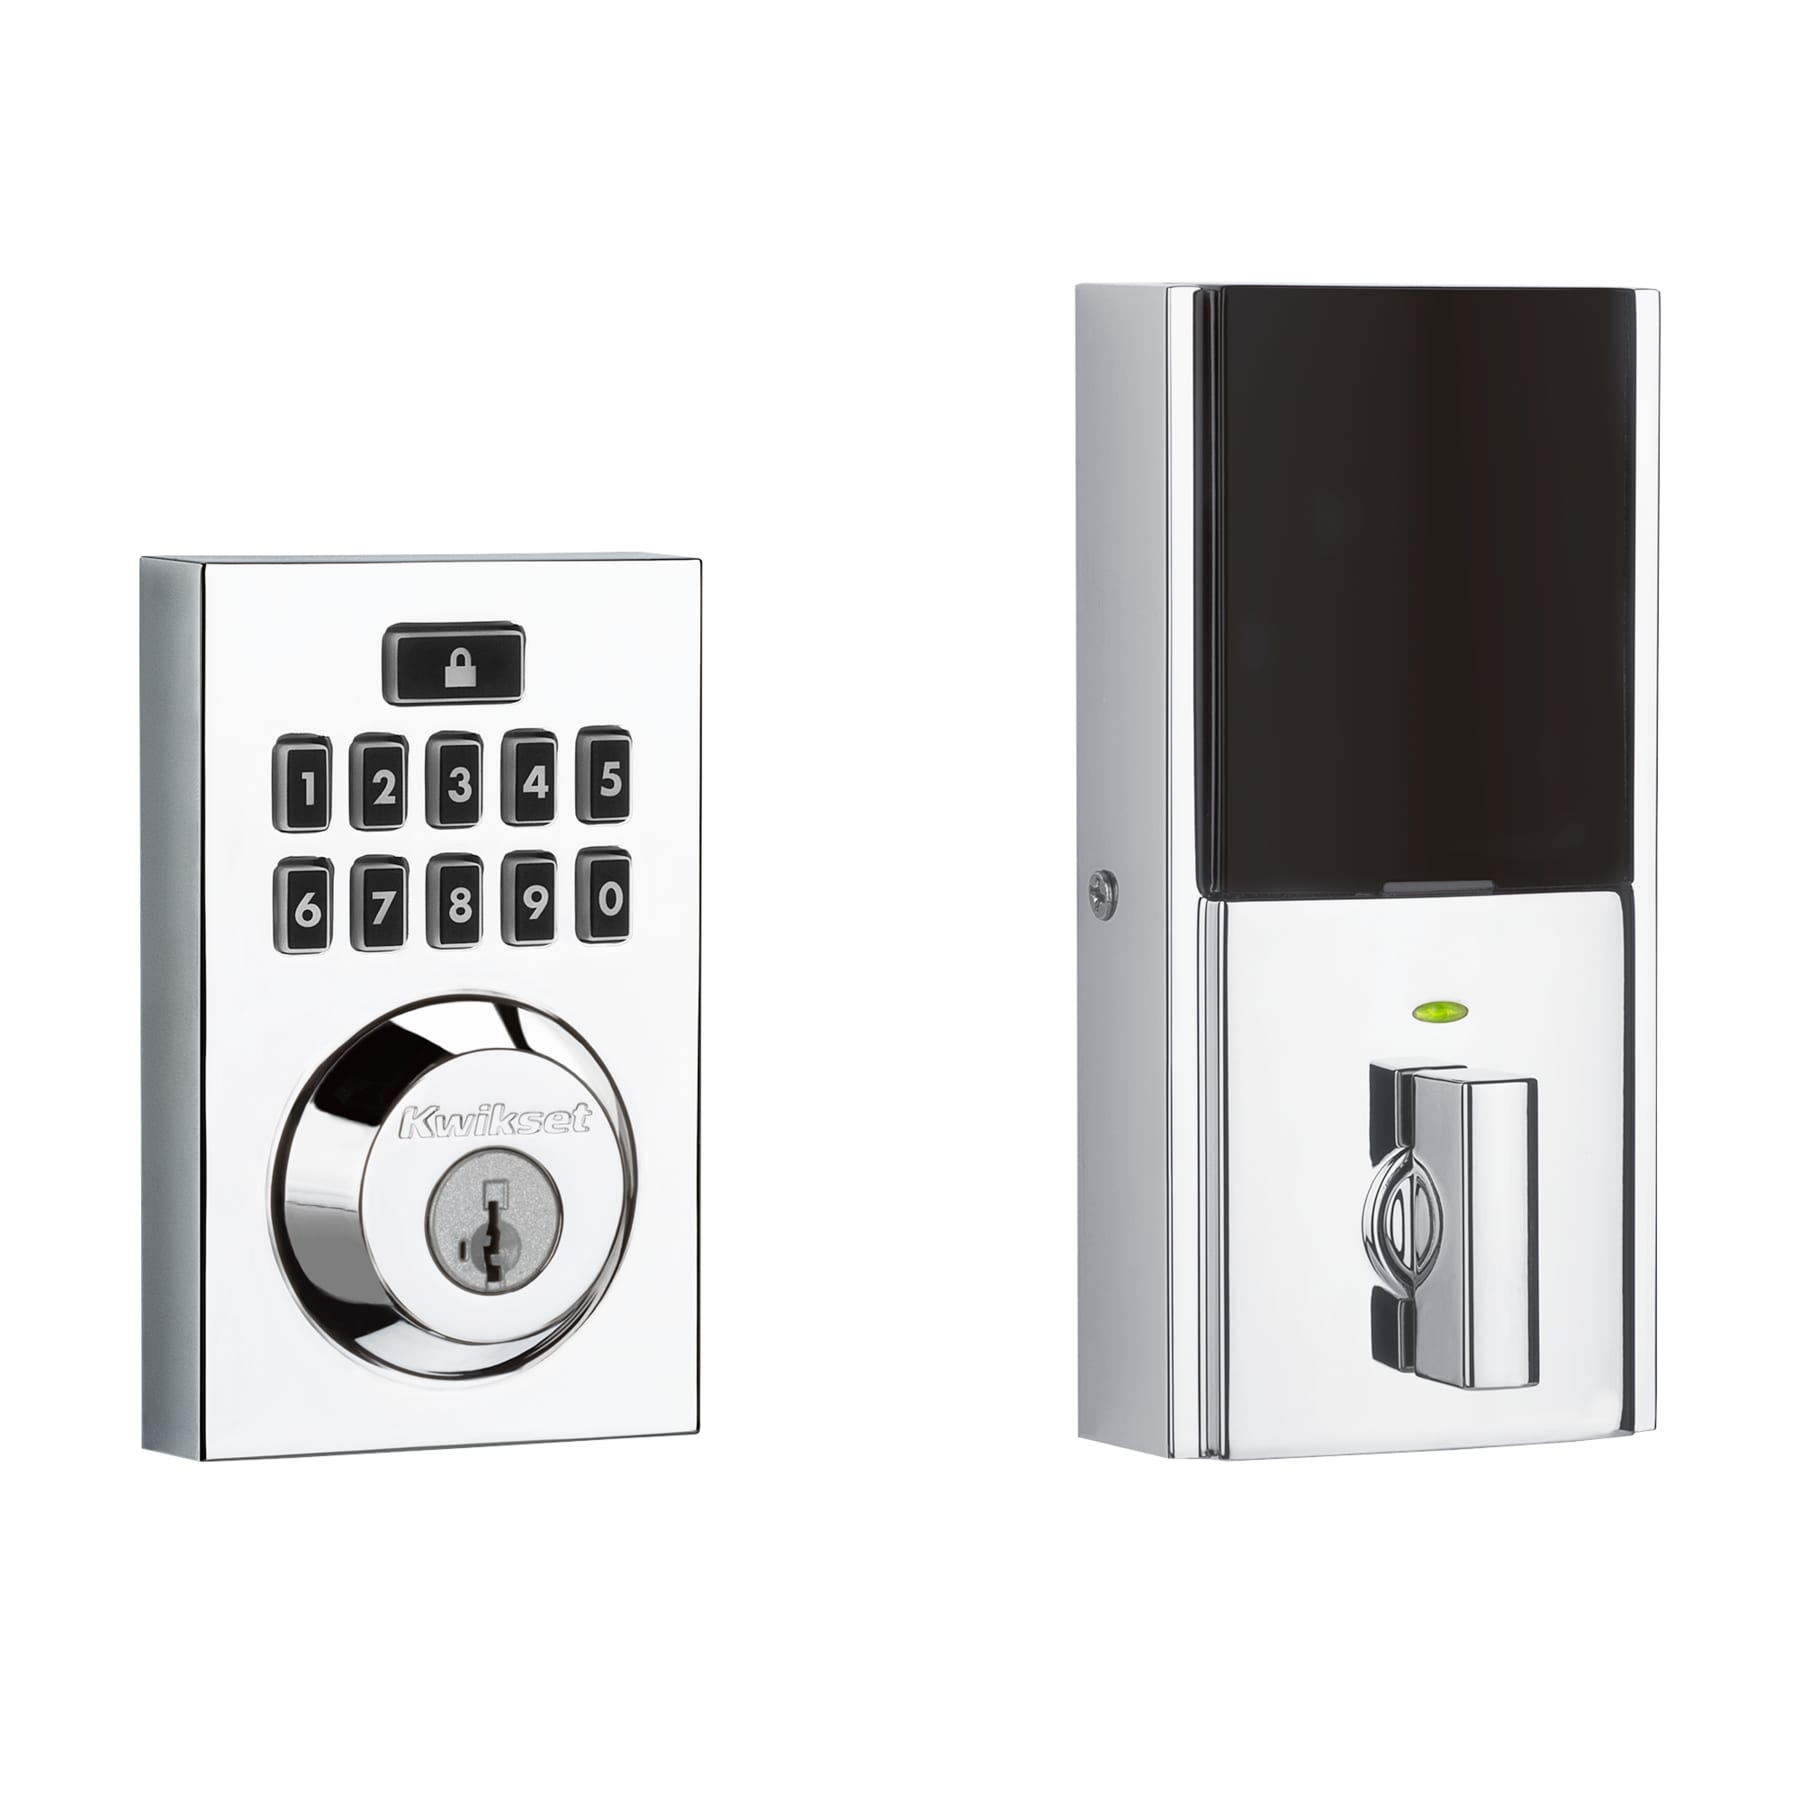 Kwikset Smart Locks with Home Connect - Keypads, Touchscreens & Deadbolts  with Remote Access